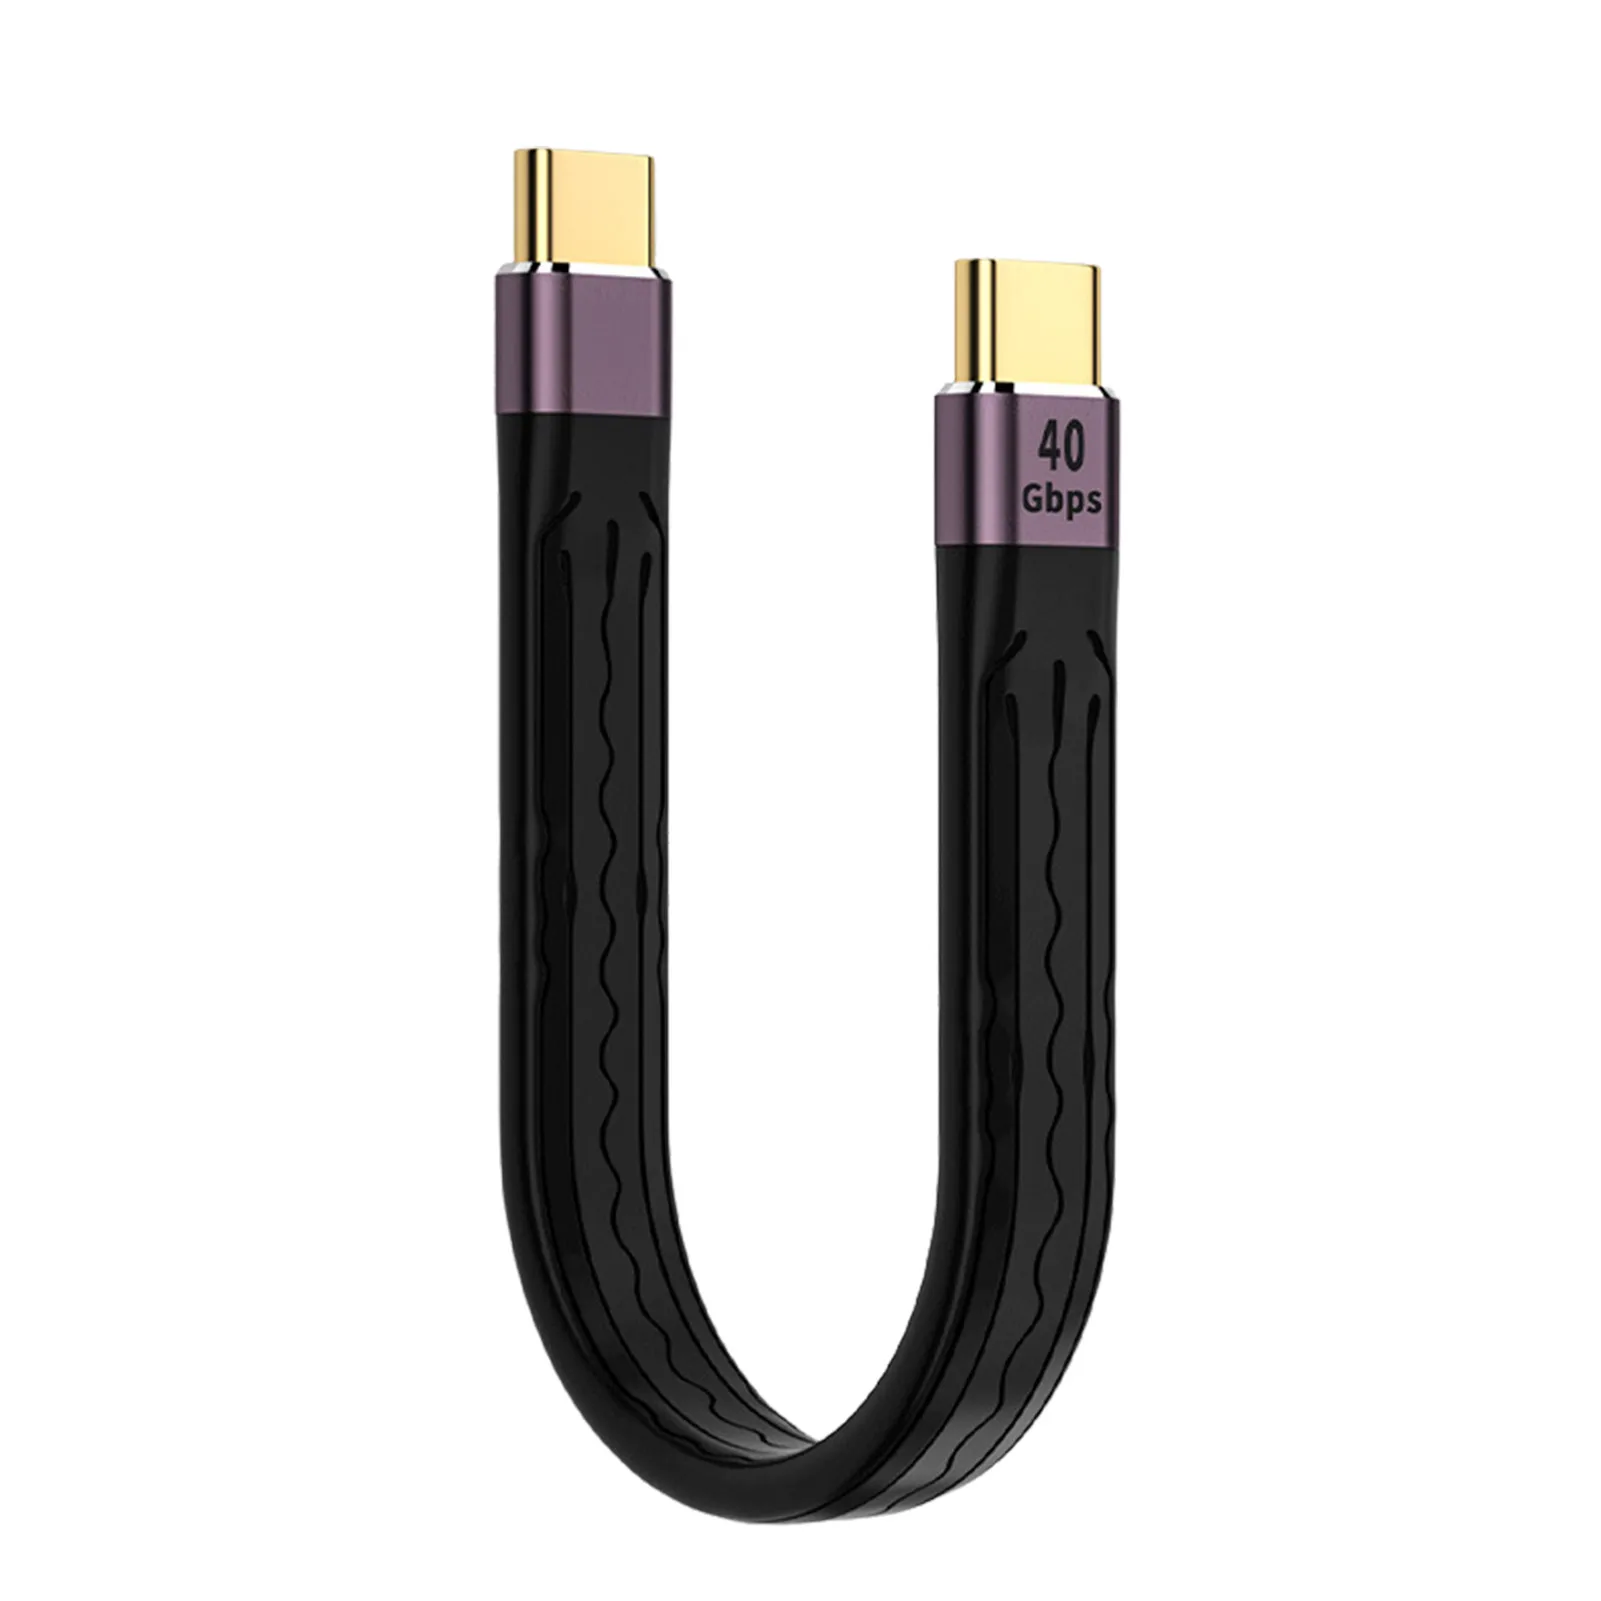 

Flat Short USB C Cable 100W 40Gbps Data Transfer 4K UHD Video PD Fast Charging FPC 3.1 Gen 2 USB C To USB C Cable Compatible